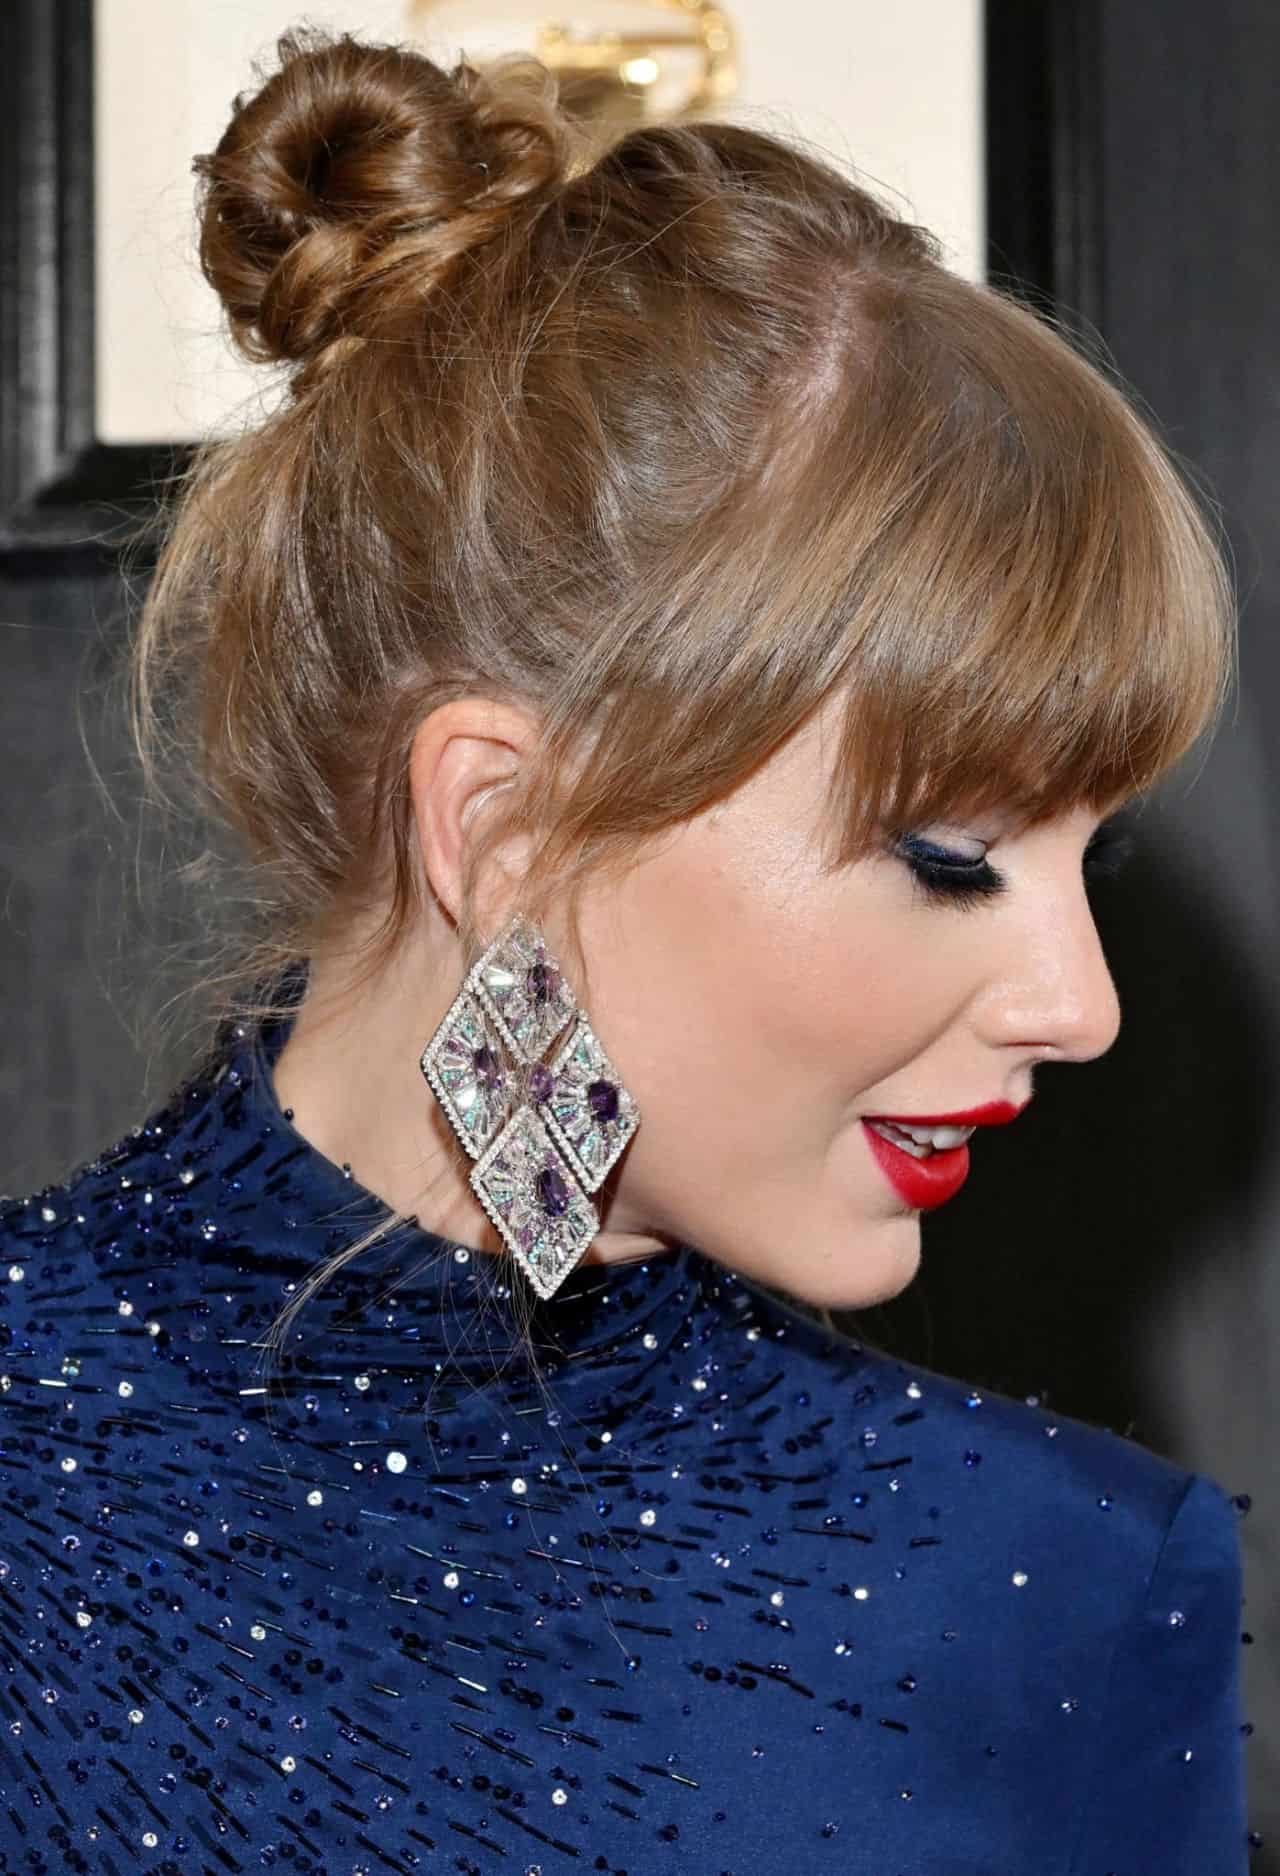 Taylor Swift Radiates Beauty in Sparkling Blue at the 65th GRAMMY Awards